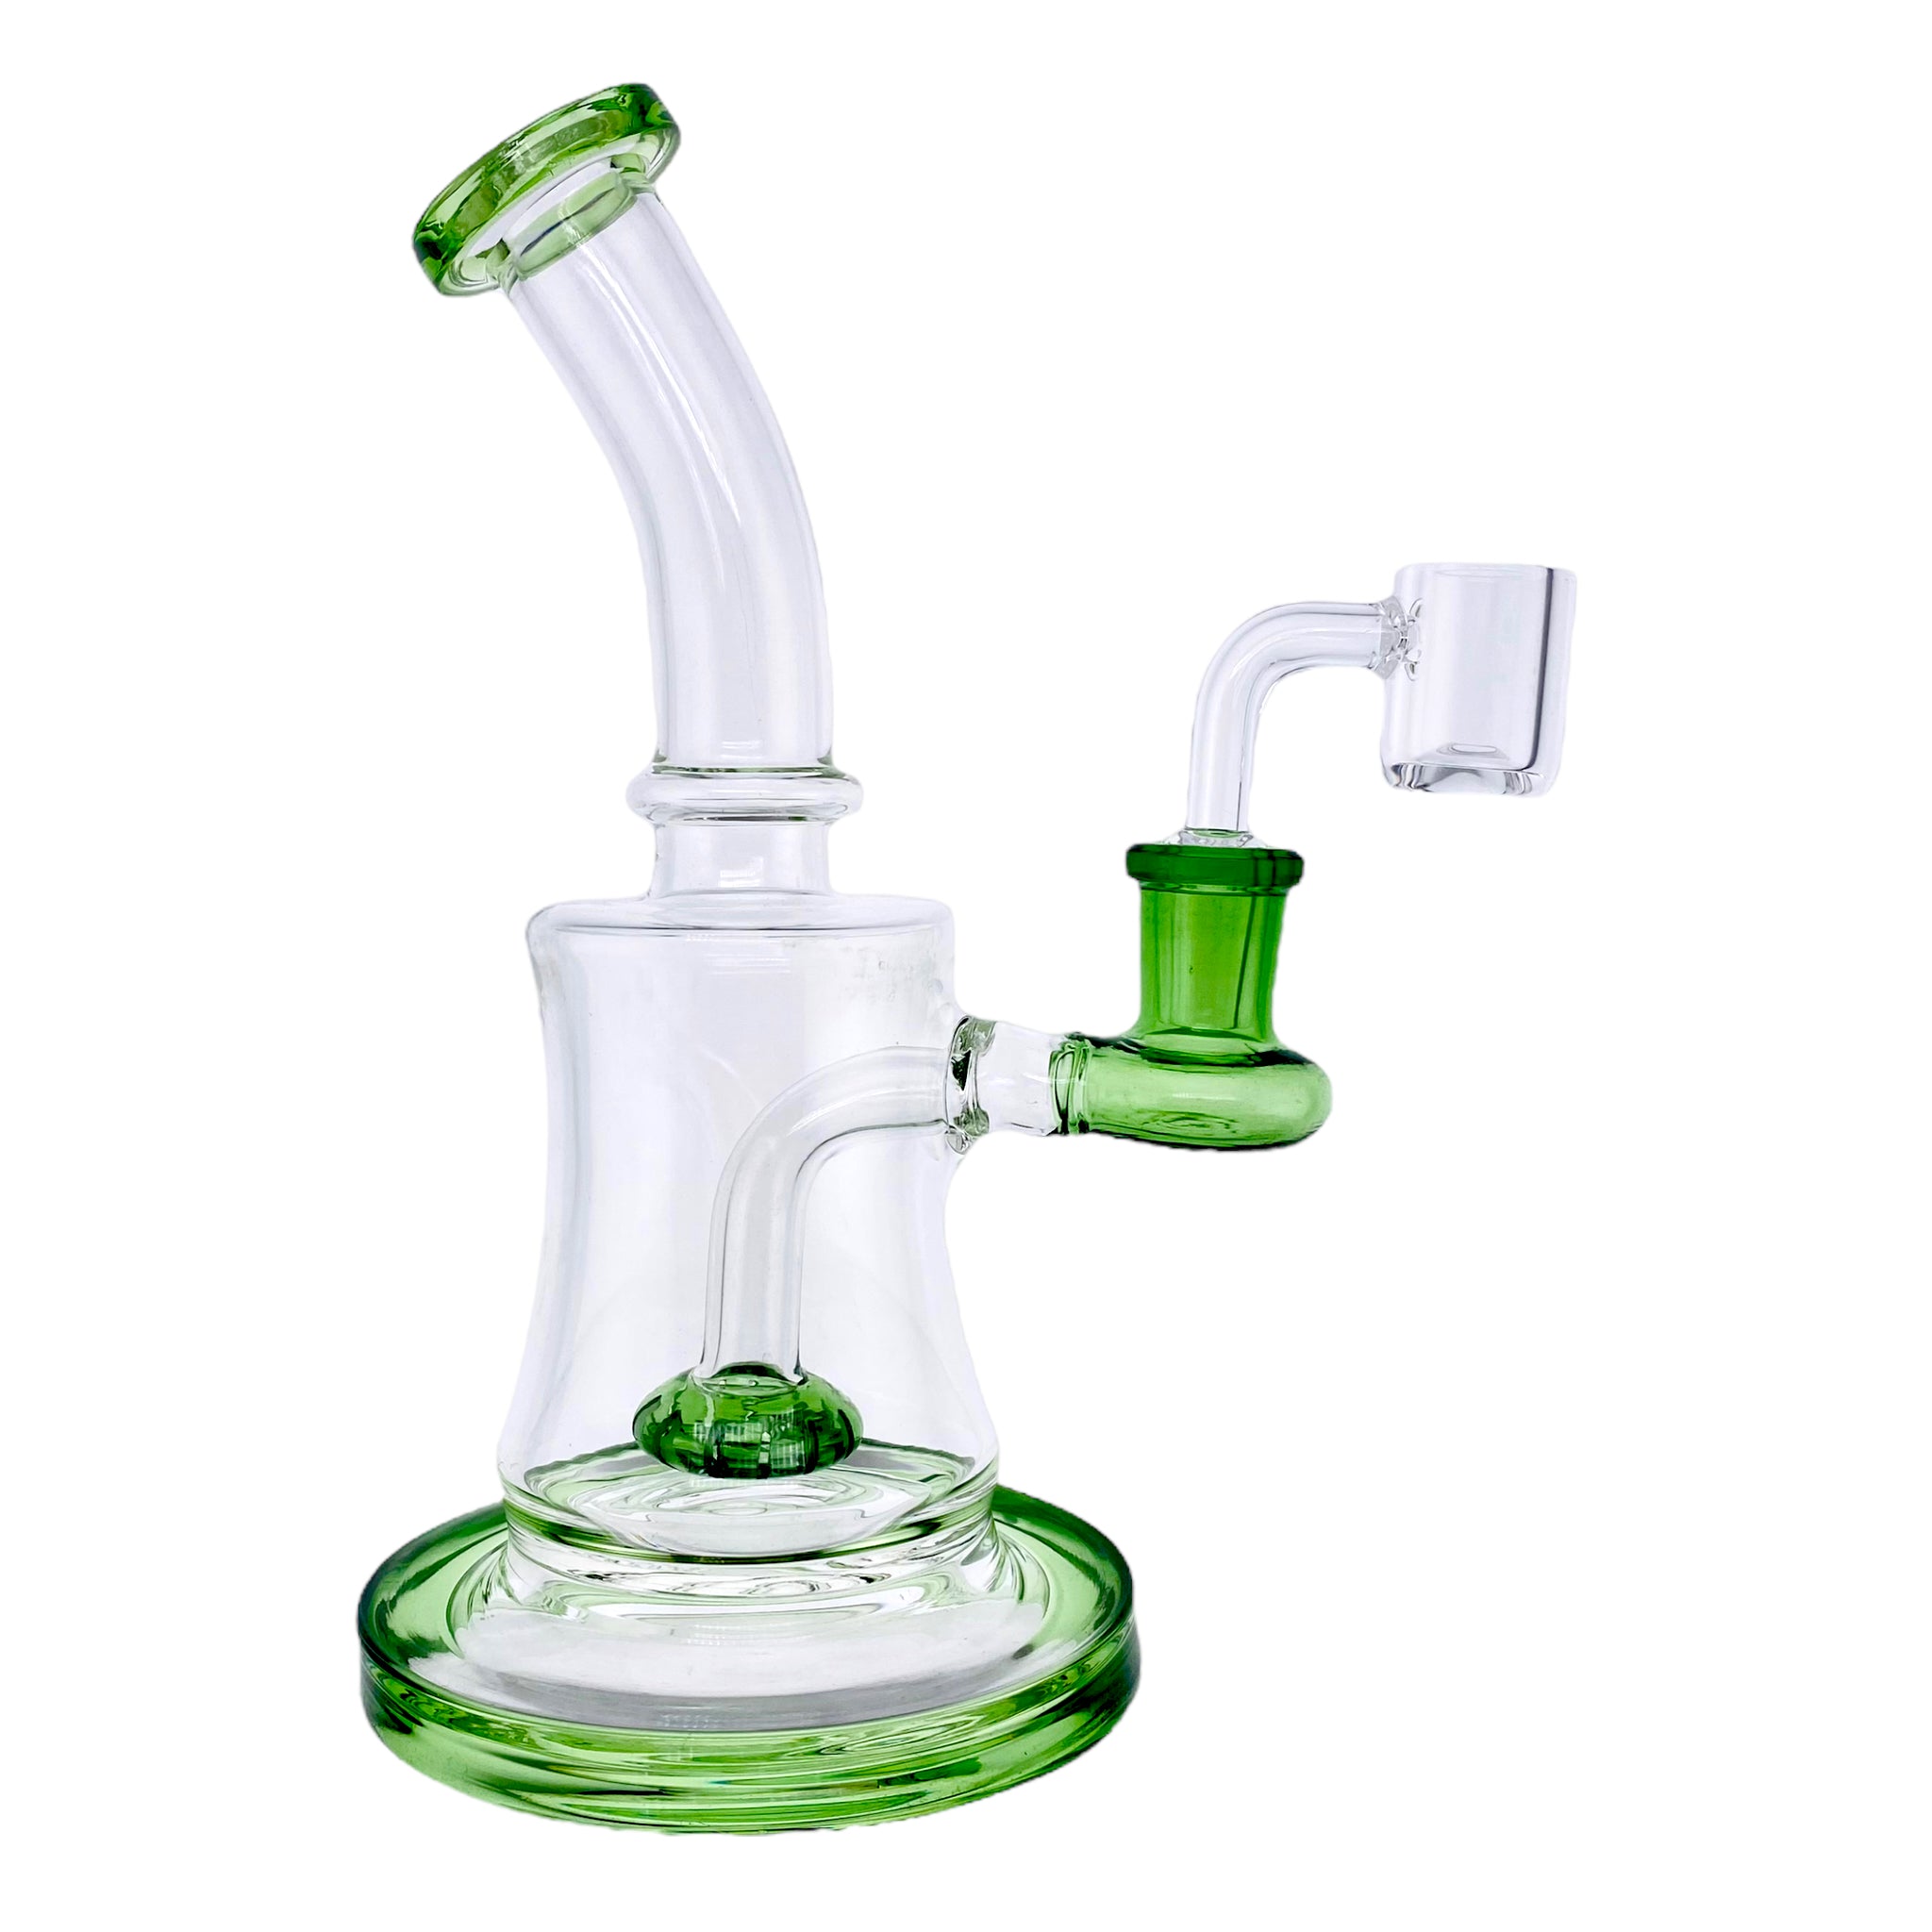 Small Clear Dab Rig With Green Showerhead Perc has 14mm female fitting